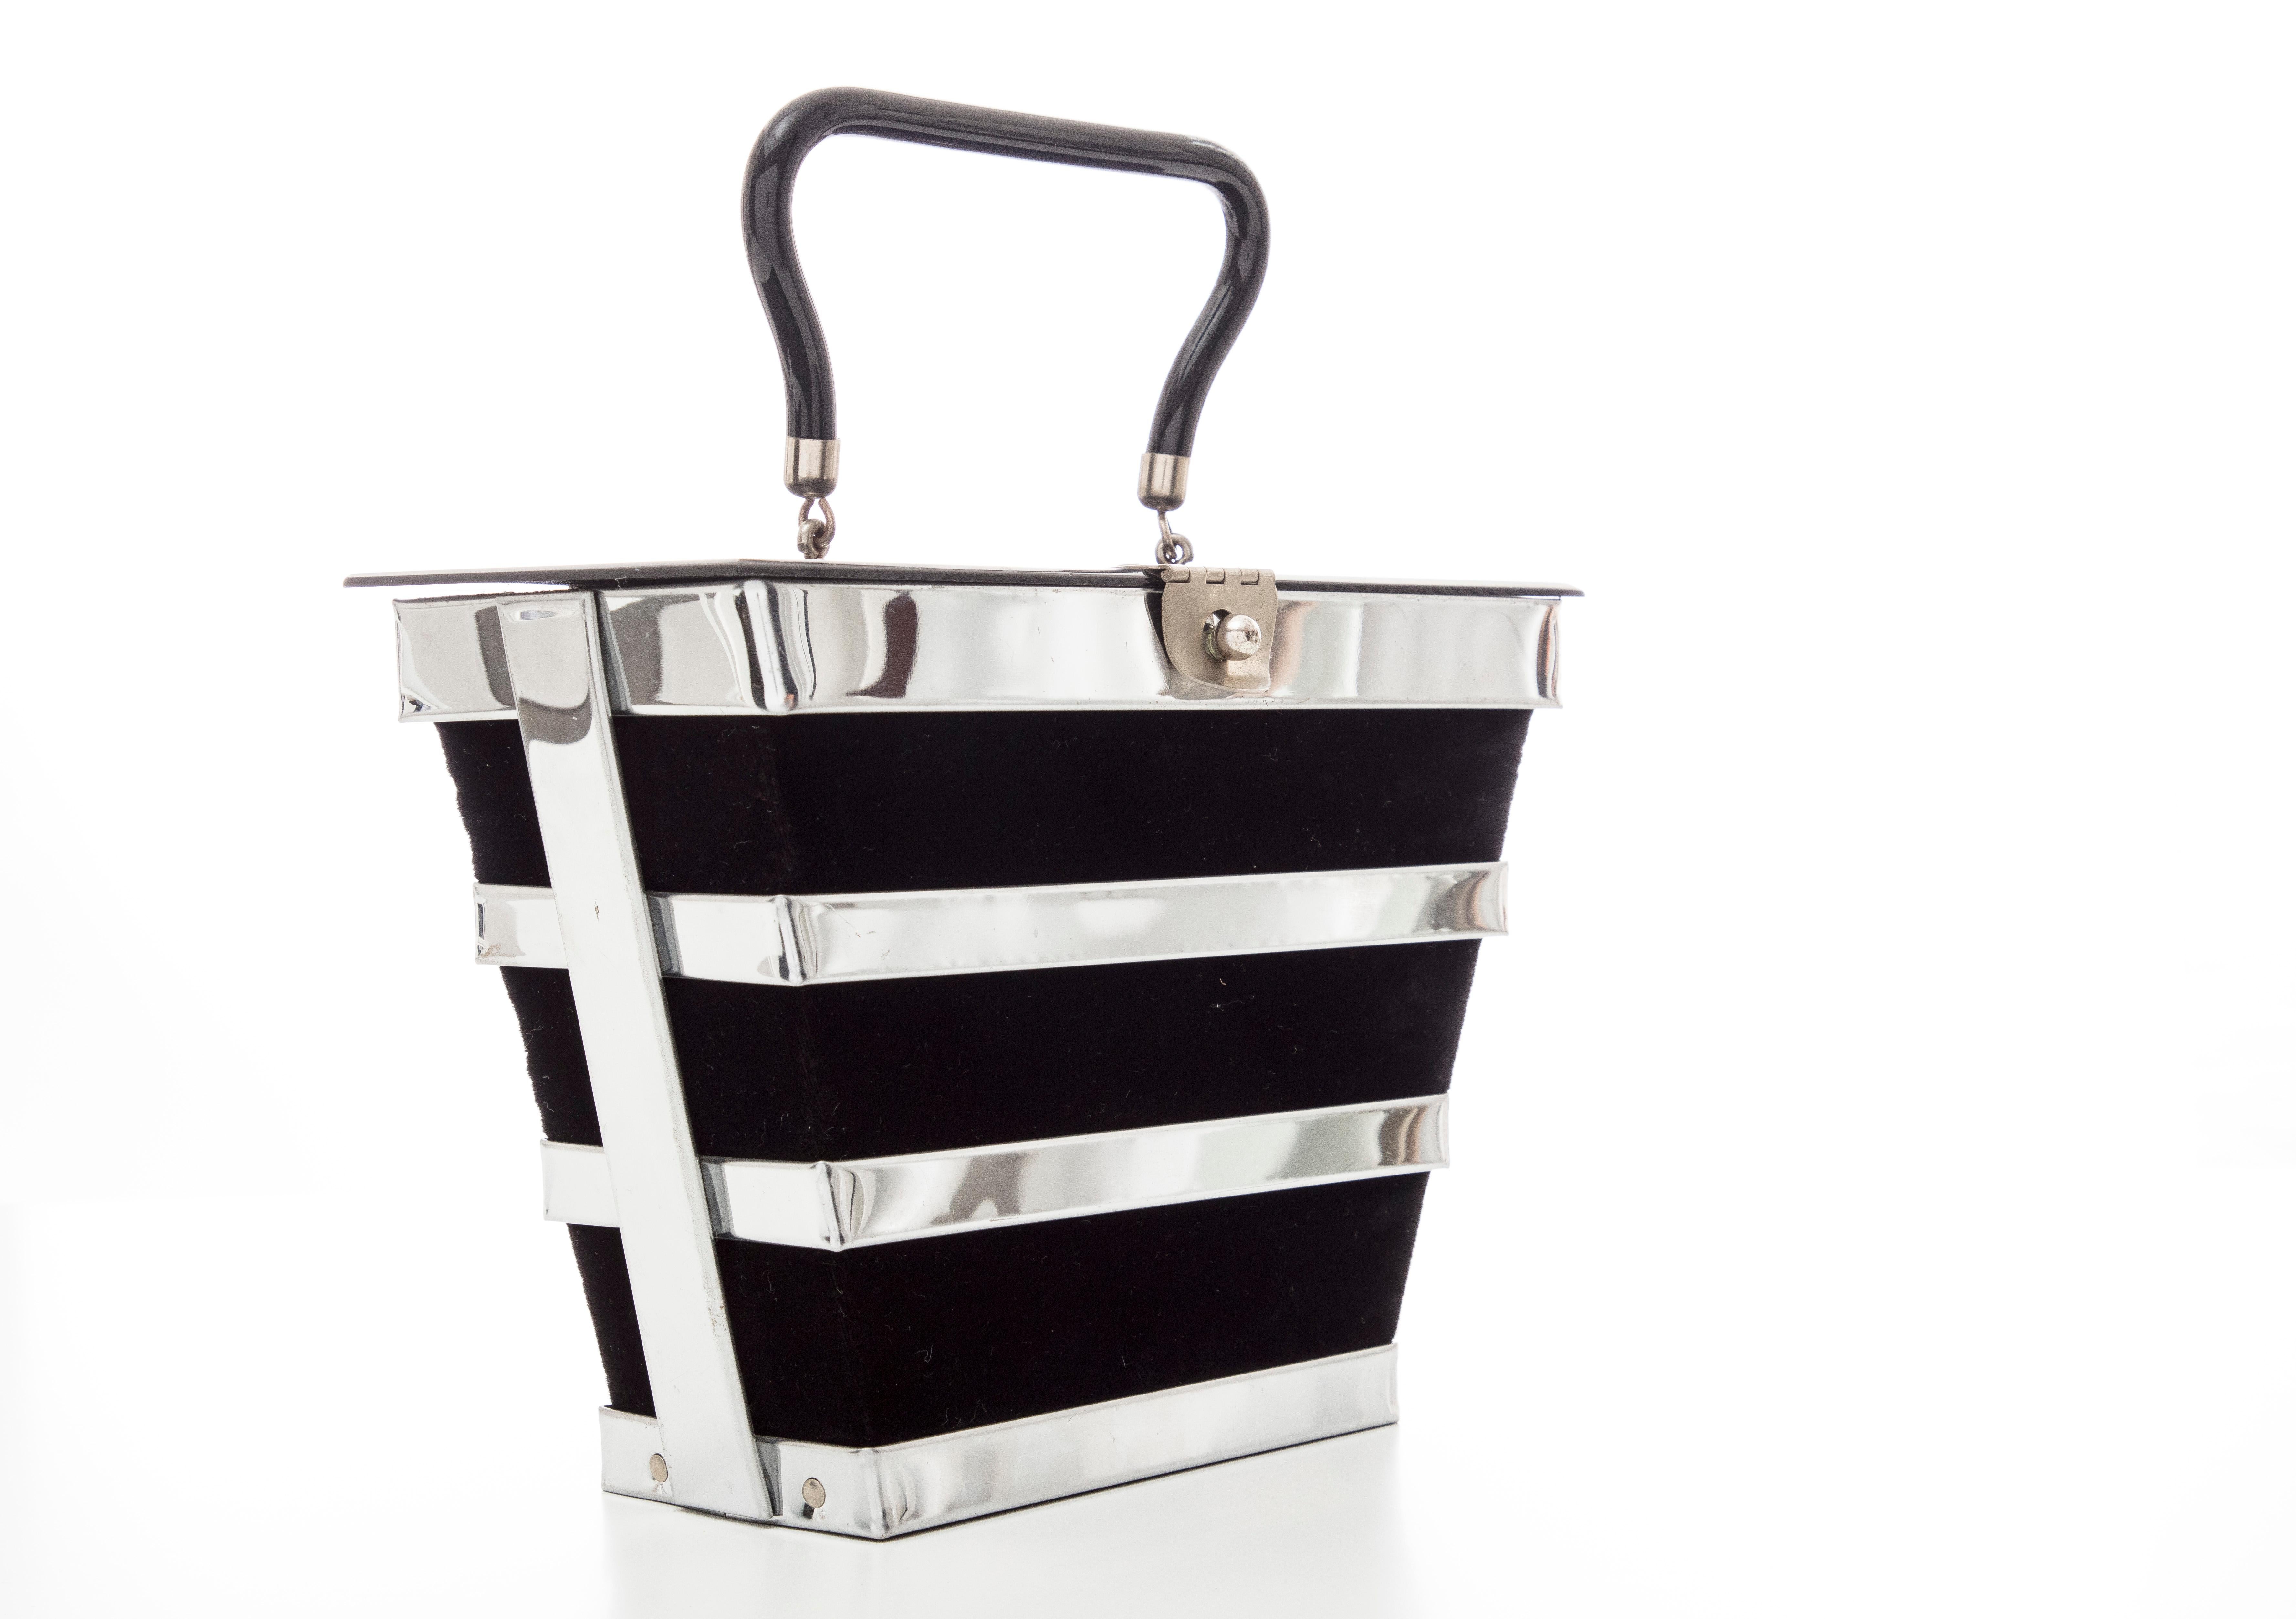 Dorset Rex, Circa: 1950's chrome caged top handle bag with black velvet exterior, lucite top and handle, lined in satin with one interior pocket.

Width: 9, Height: 7, Depth: 4.5